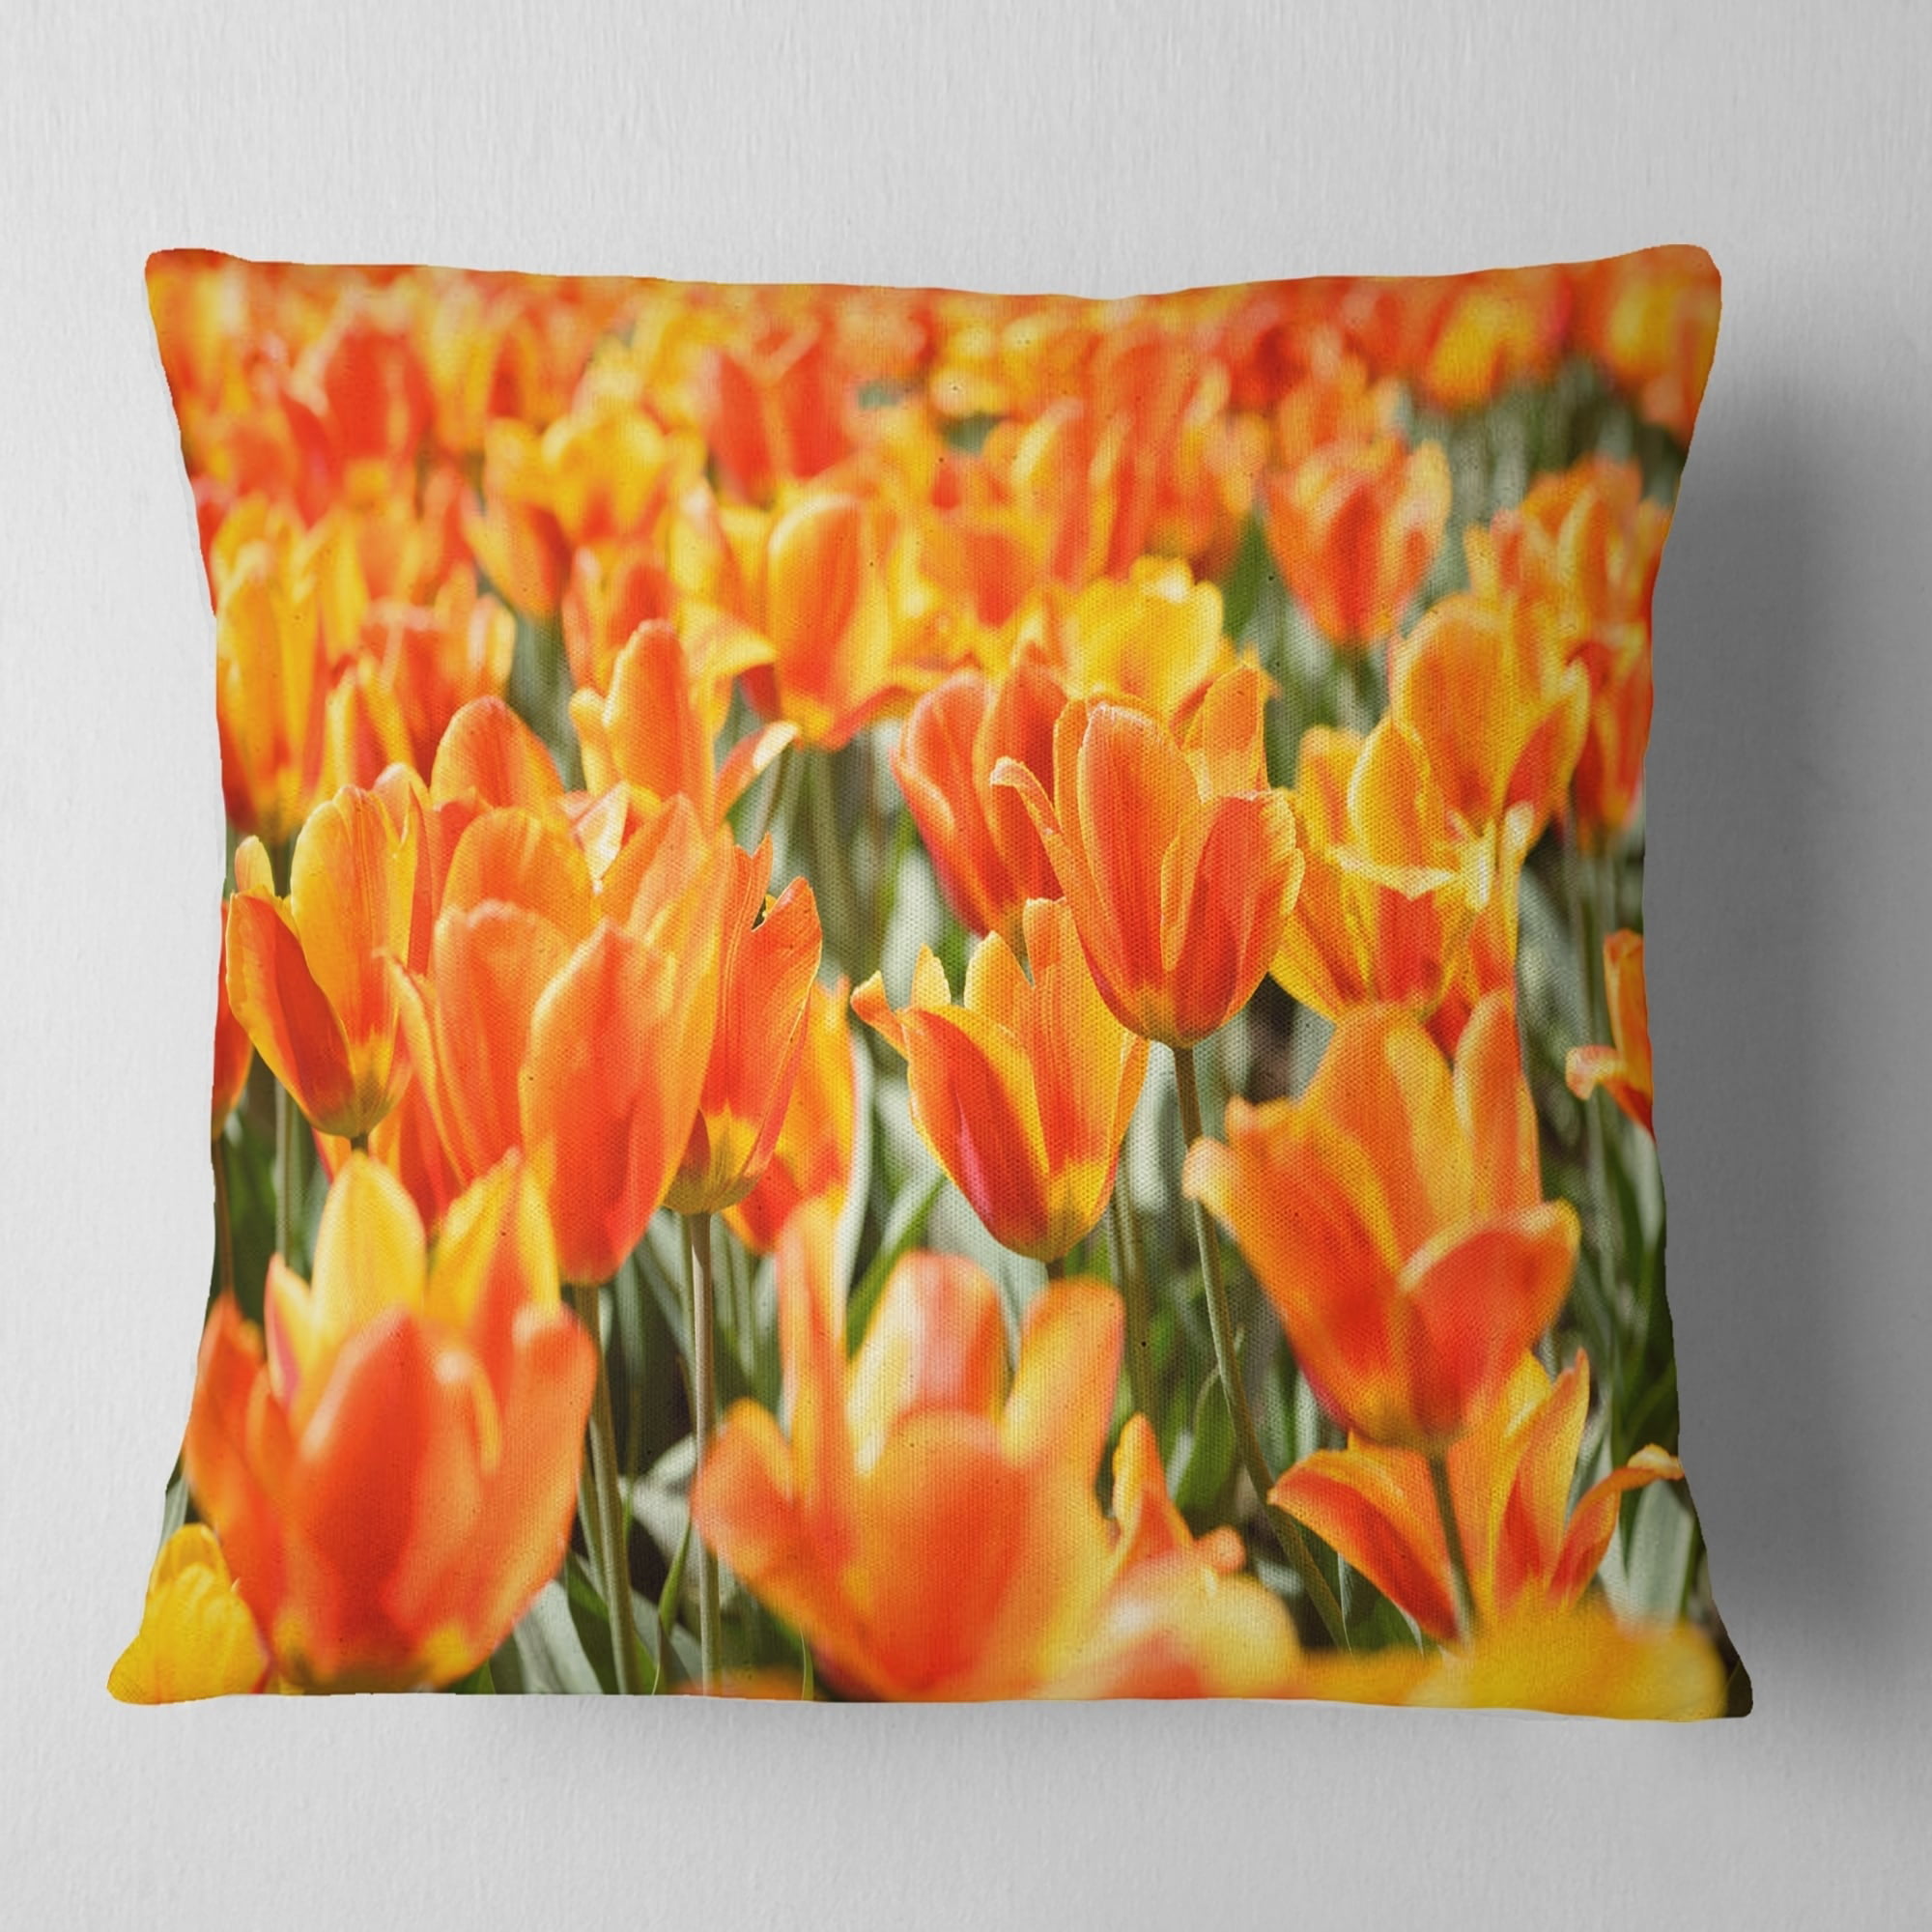 in Sofa Throw Pillow 12 in x 20 in Insert Printed On Both Side Designart CU13902-12-20 Bloomy Pink Tulip on White Drawing Flower Lumbar Cushion Cover for Living Room